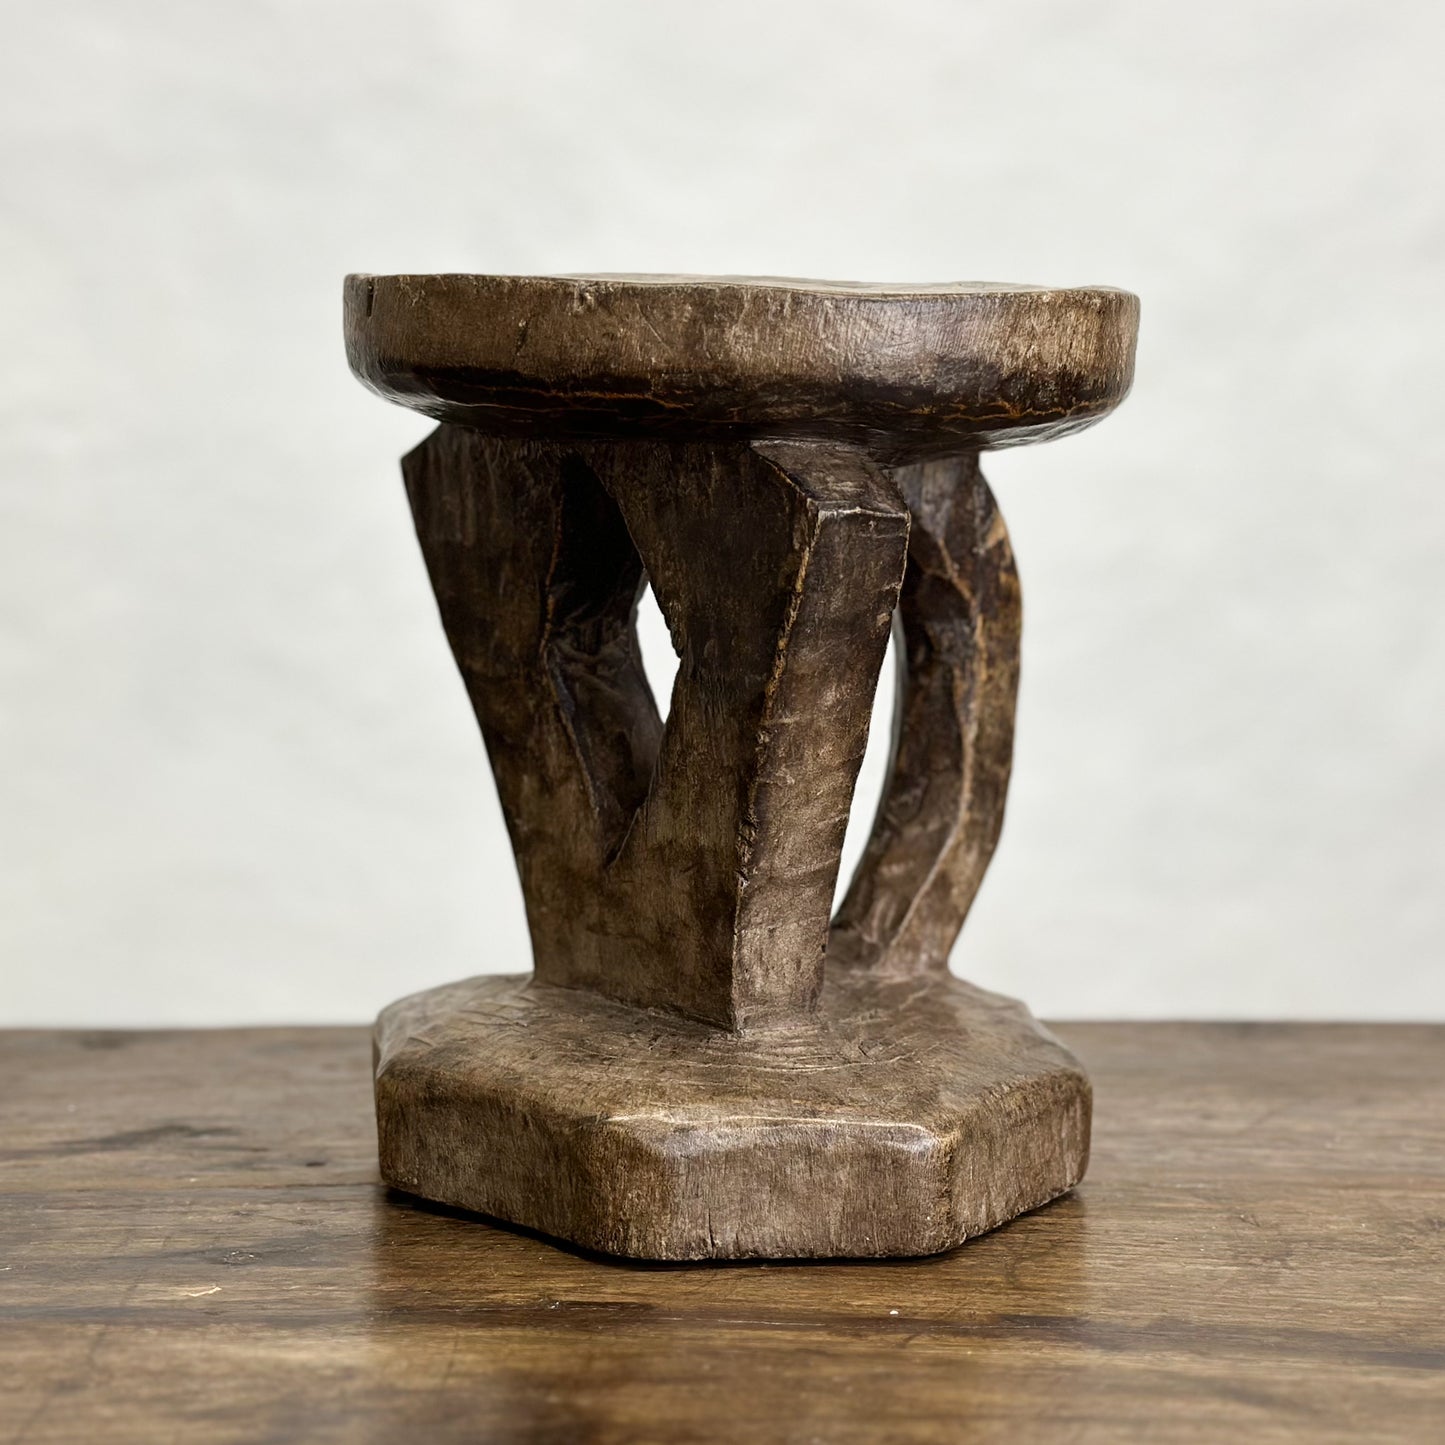 Carved-Timber-Tonga-Stool-Pedestal-Wooden-Africa-African-Zambia